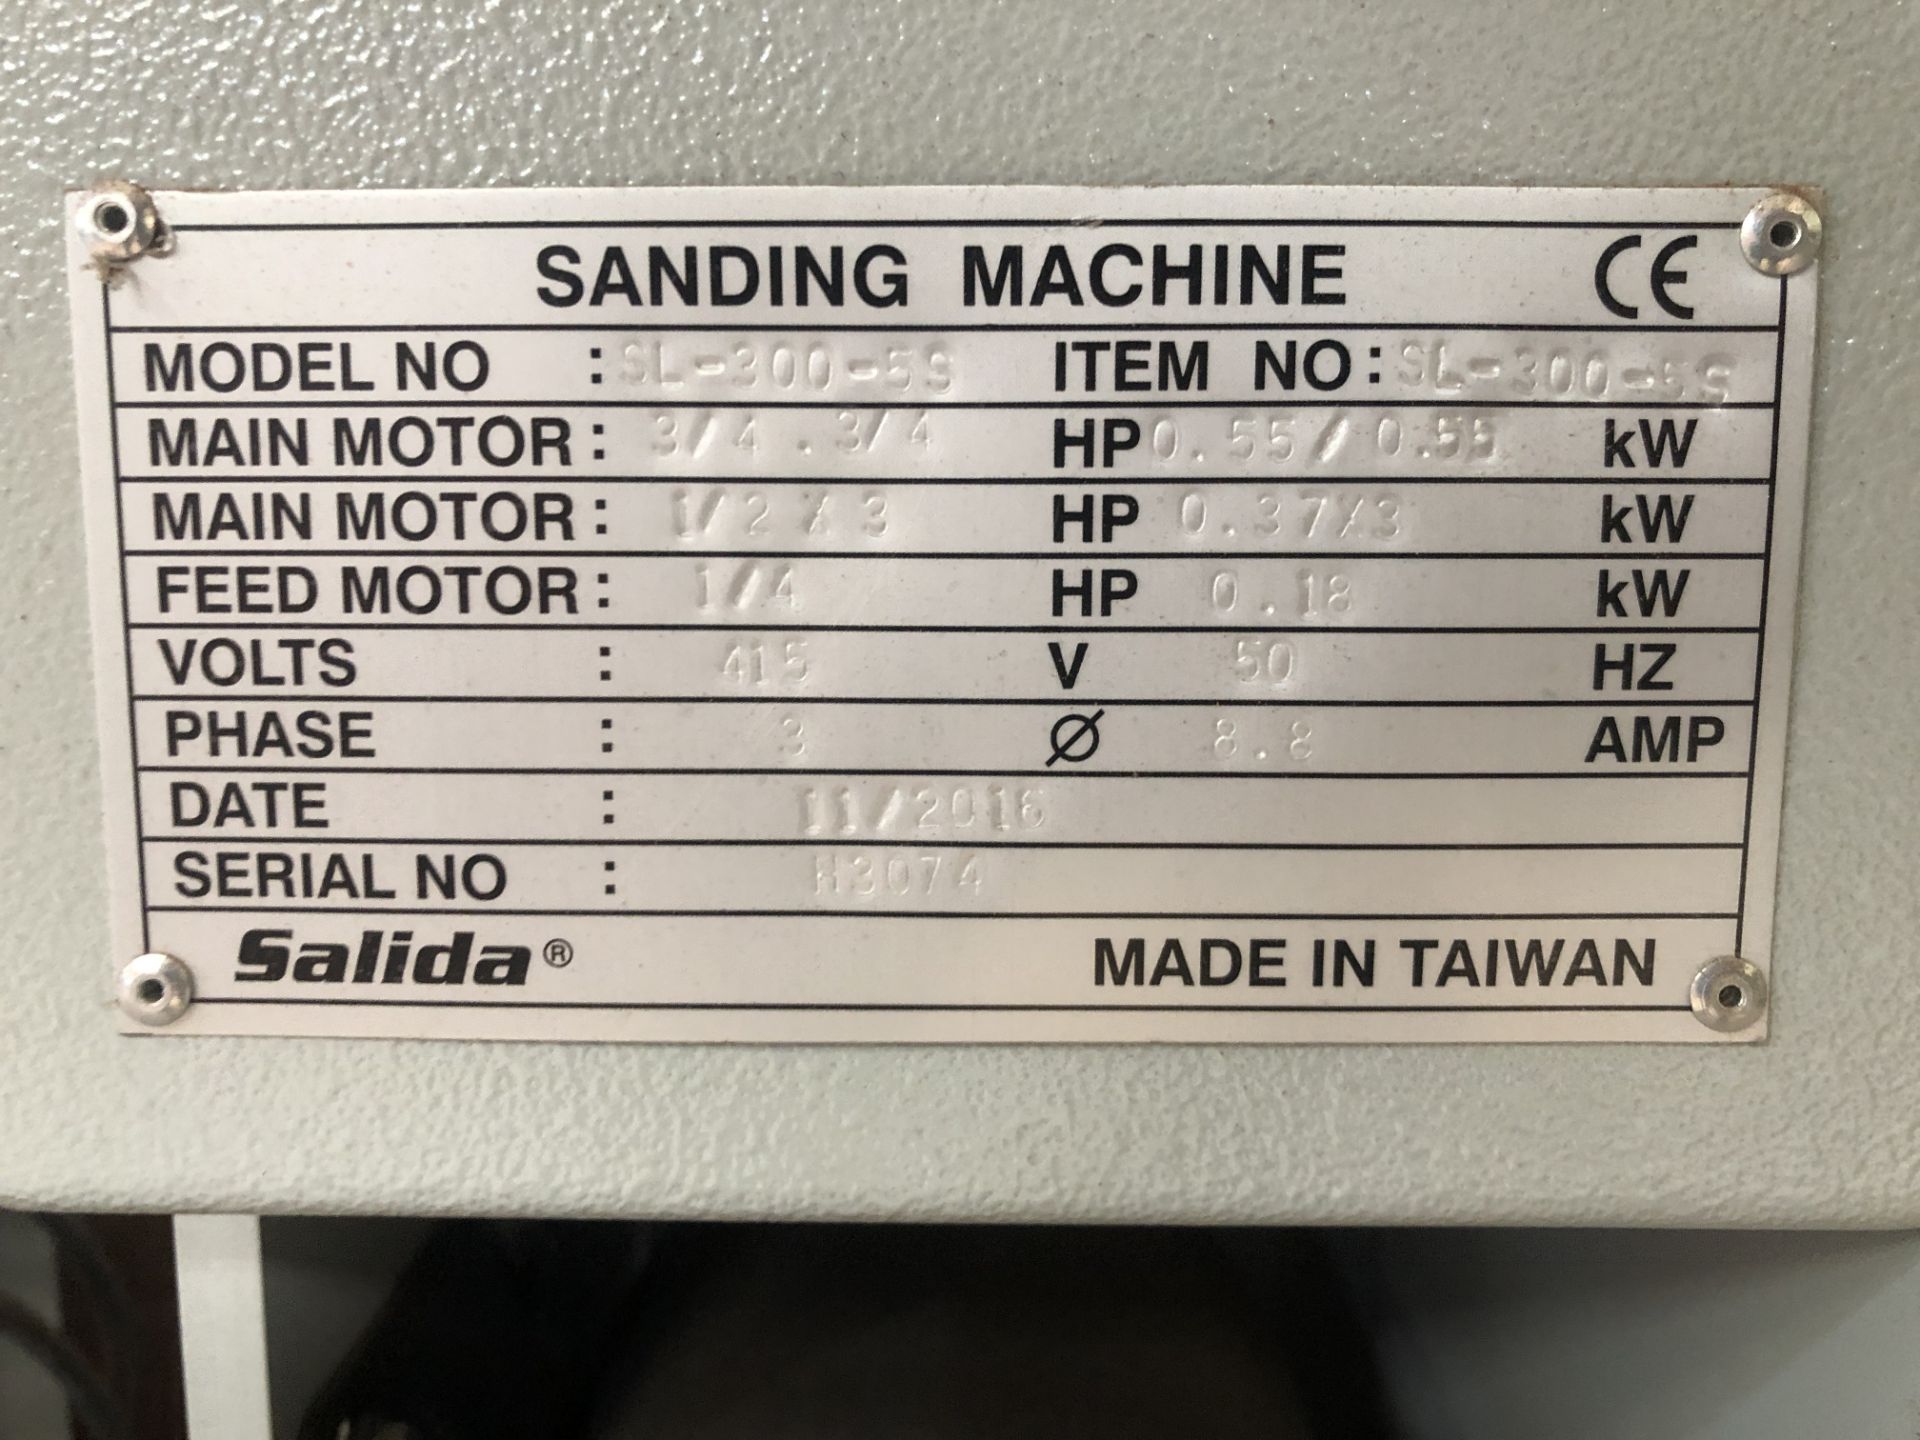 Unosand Model SL/300/55 Sanding Machine Serial No: H3074 (11/2016) 3phase(Please note: Item needs - Image 5 of 16